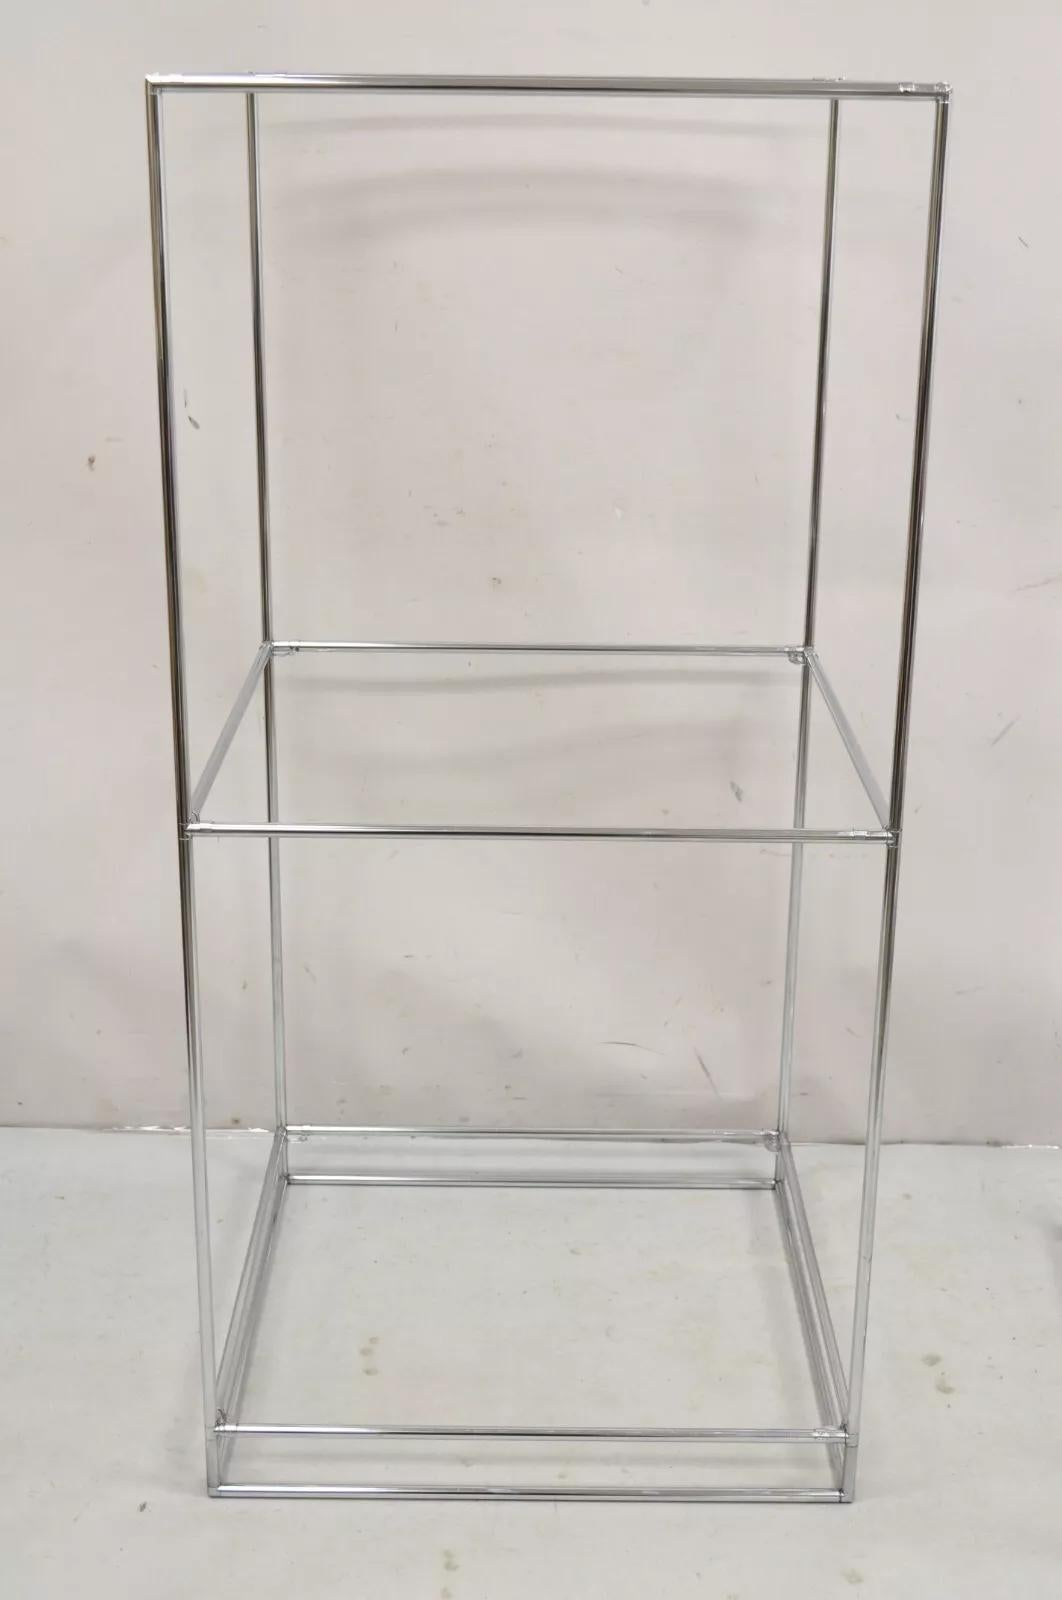 Abstracta Modular Shelf by Poul Cadovius for Royal System Smoked Glass - 2 Pcs For Sale 2